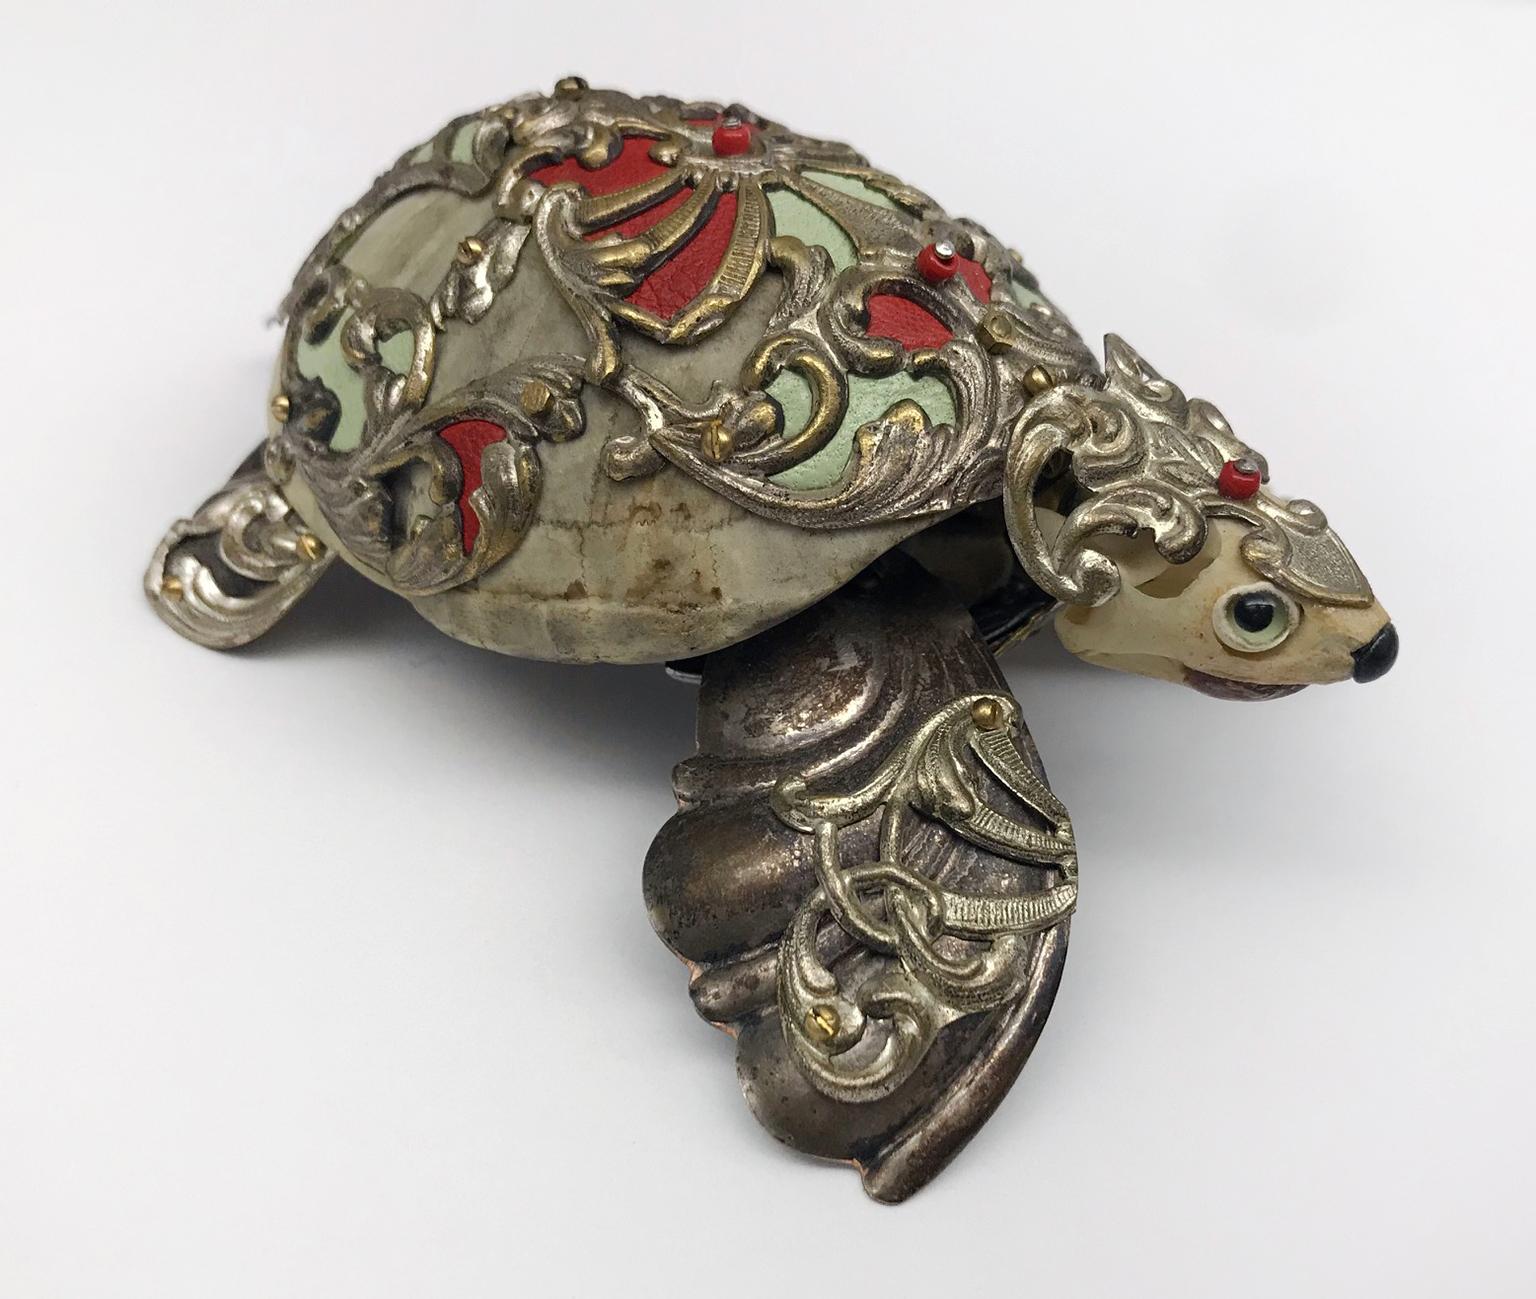 "Percival" antique hardware and findings turtle sculpture - Mixed Media Art by Jessica Joslin